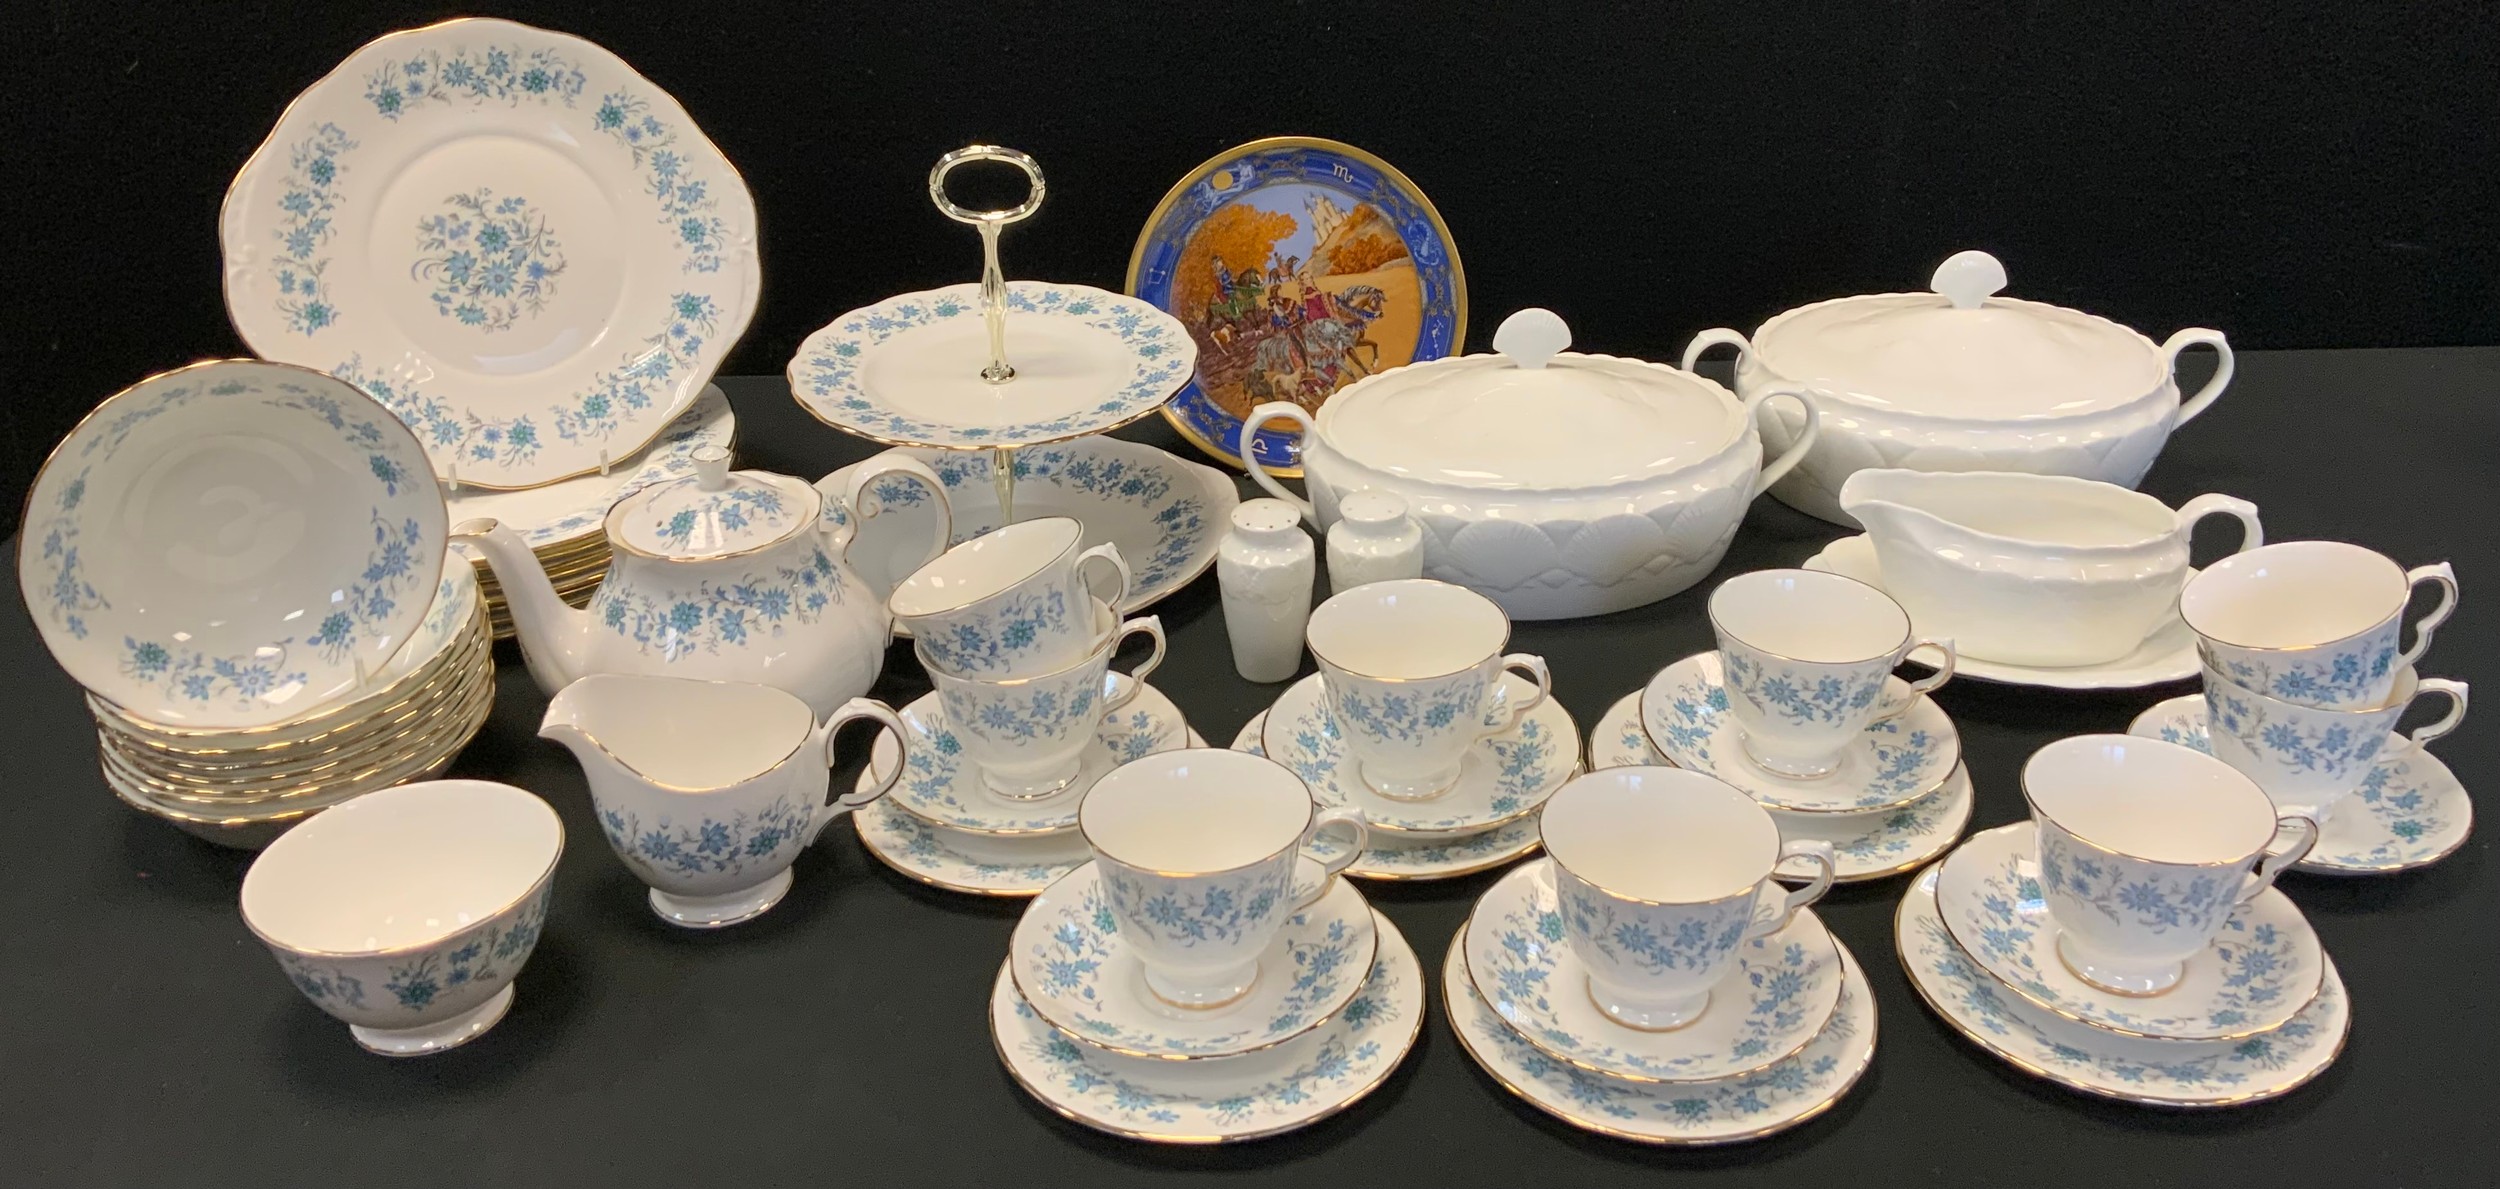 Ceramics - a pair of Wedgewood & Coalport Oceanside pattern oval tureens and covers, similar gravy